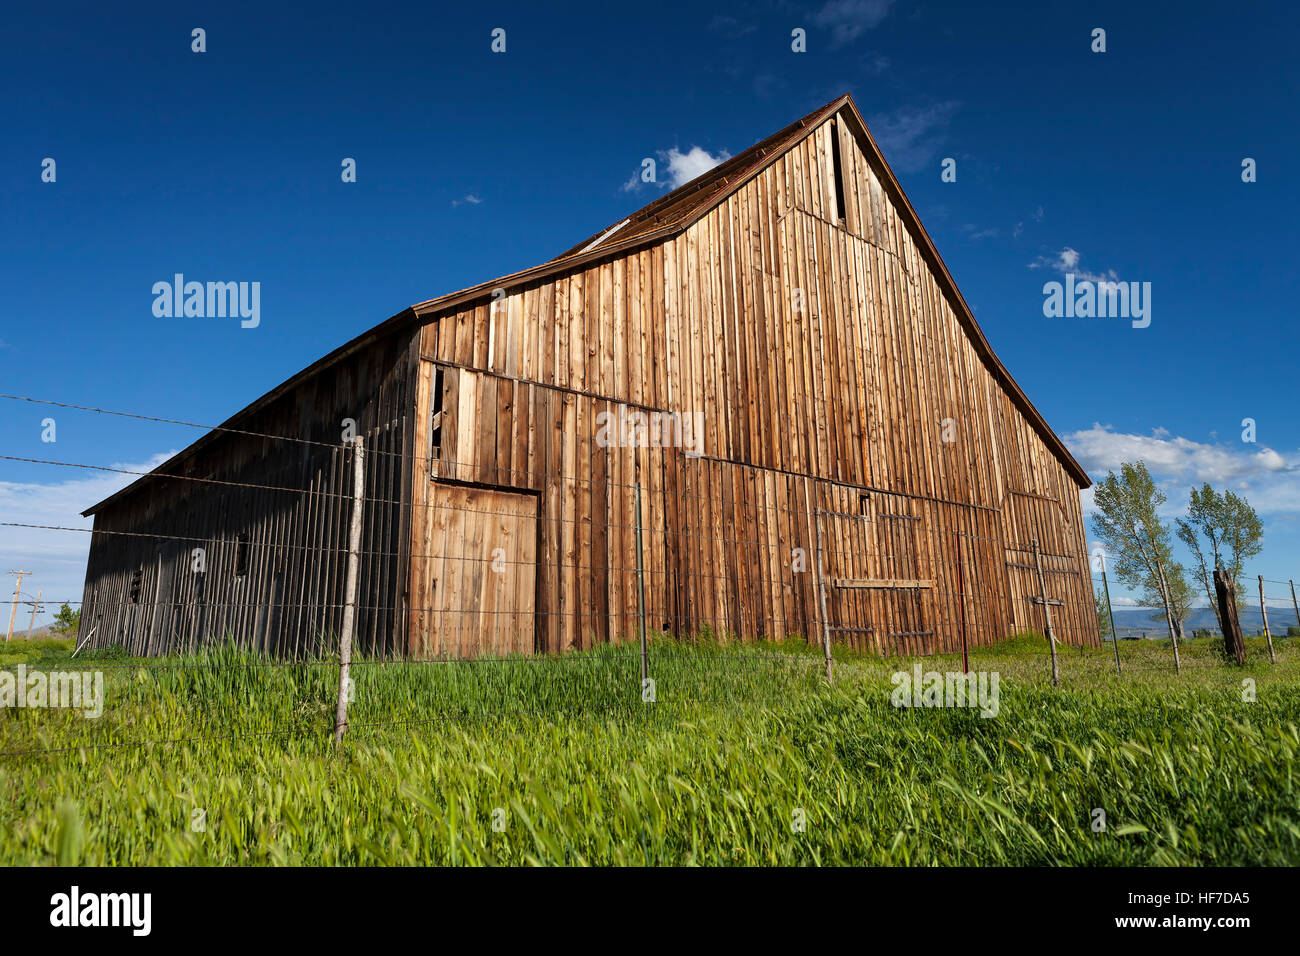 Old vintage barn on ranch with blue sky and green grass. Stock Photo